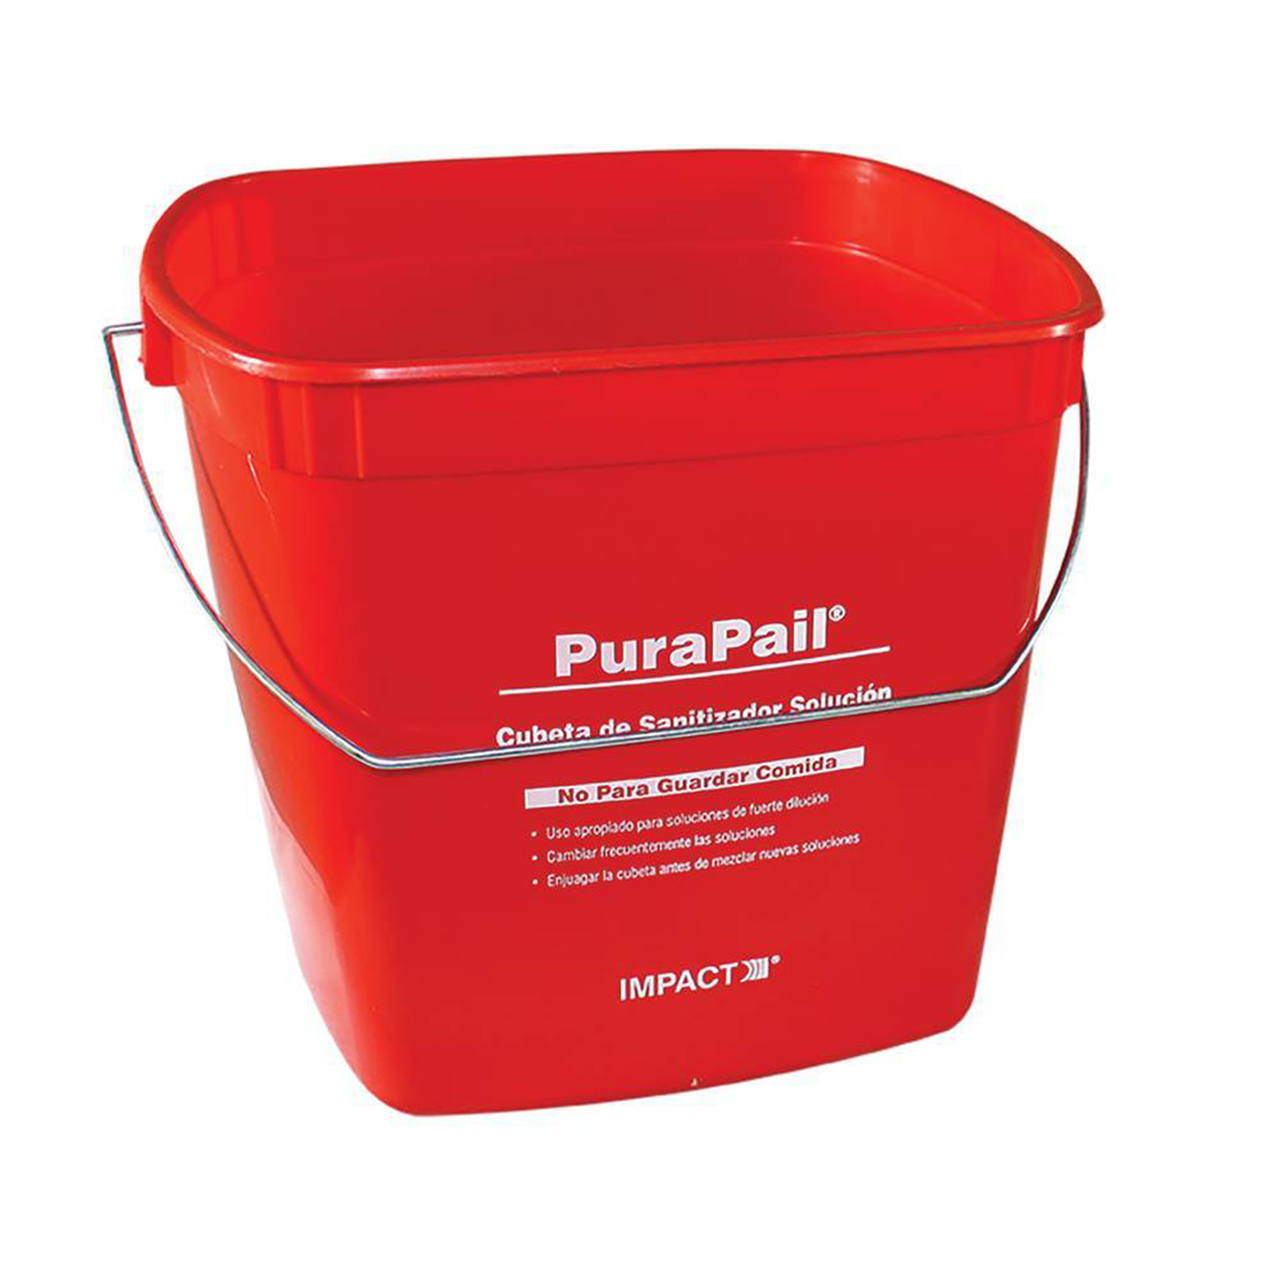 RW Clean 6 Qt Square Red Plastic Sanitizing Bucket - with Stainless Steel  Handle - 8 1/2 x 8 1/2 x 7 1/4 - 1 count box